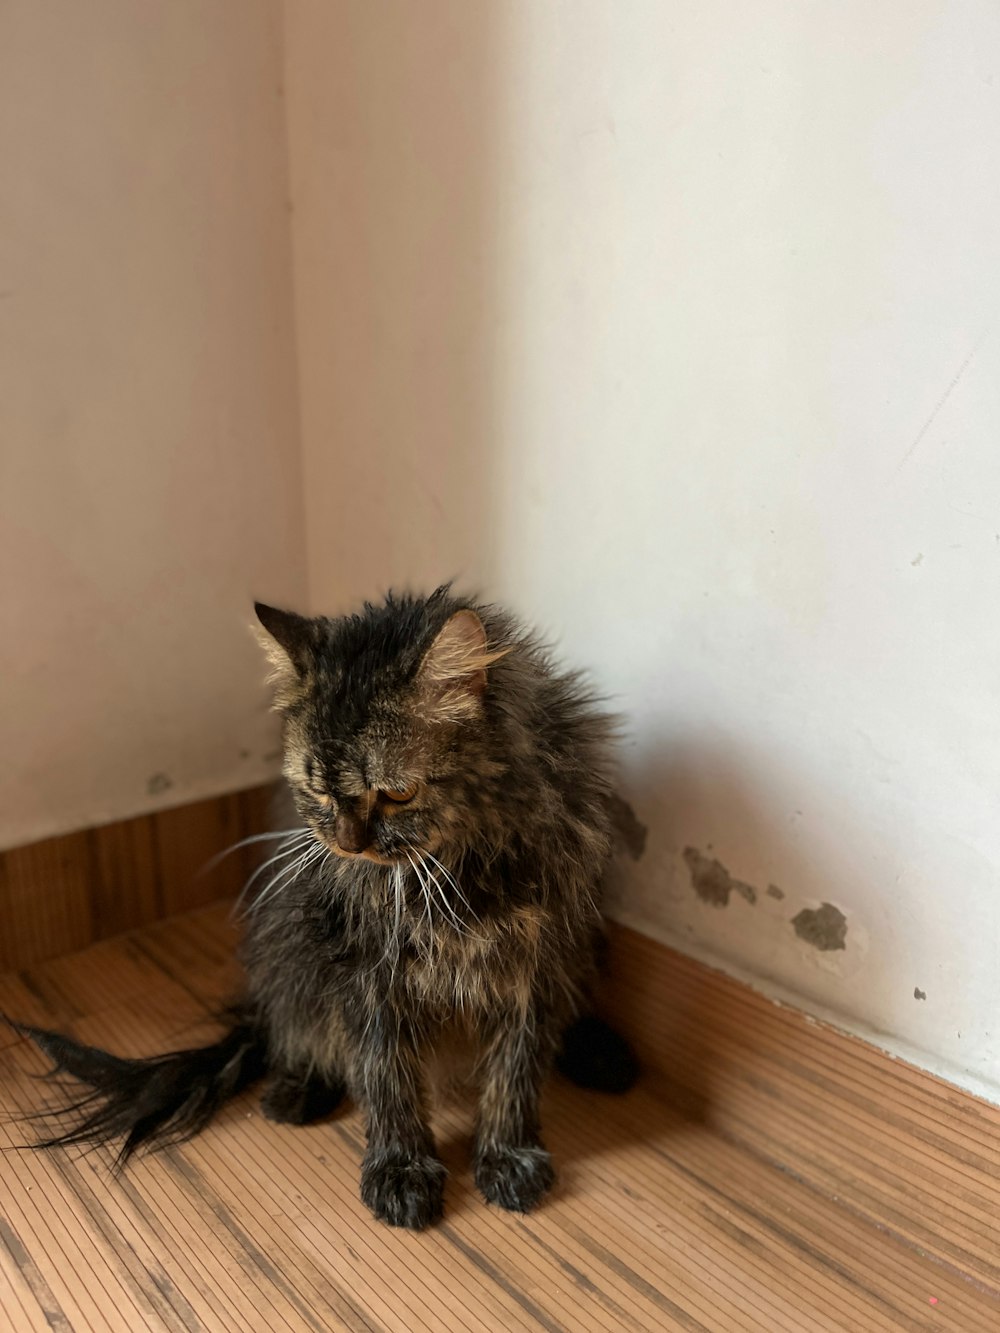 a cat sitting on a wooden floor next to a wall